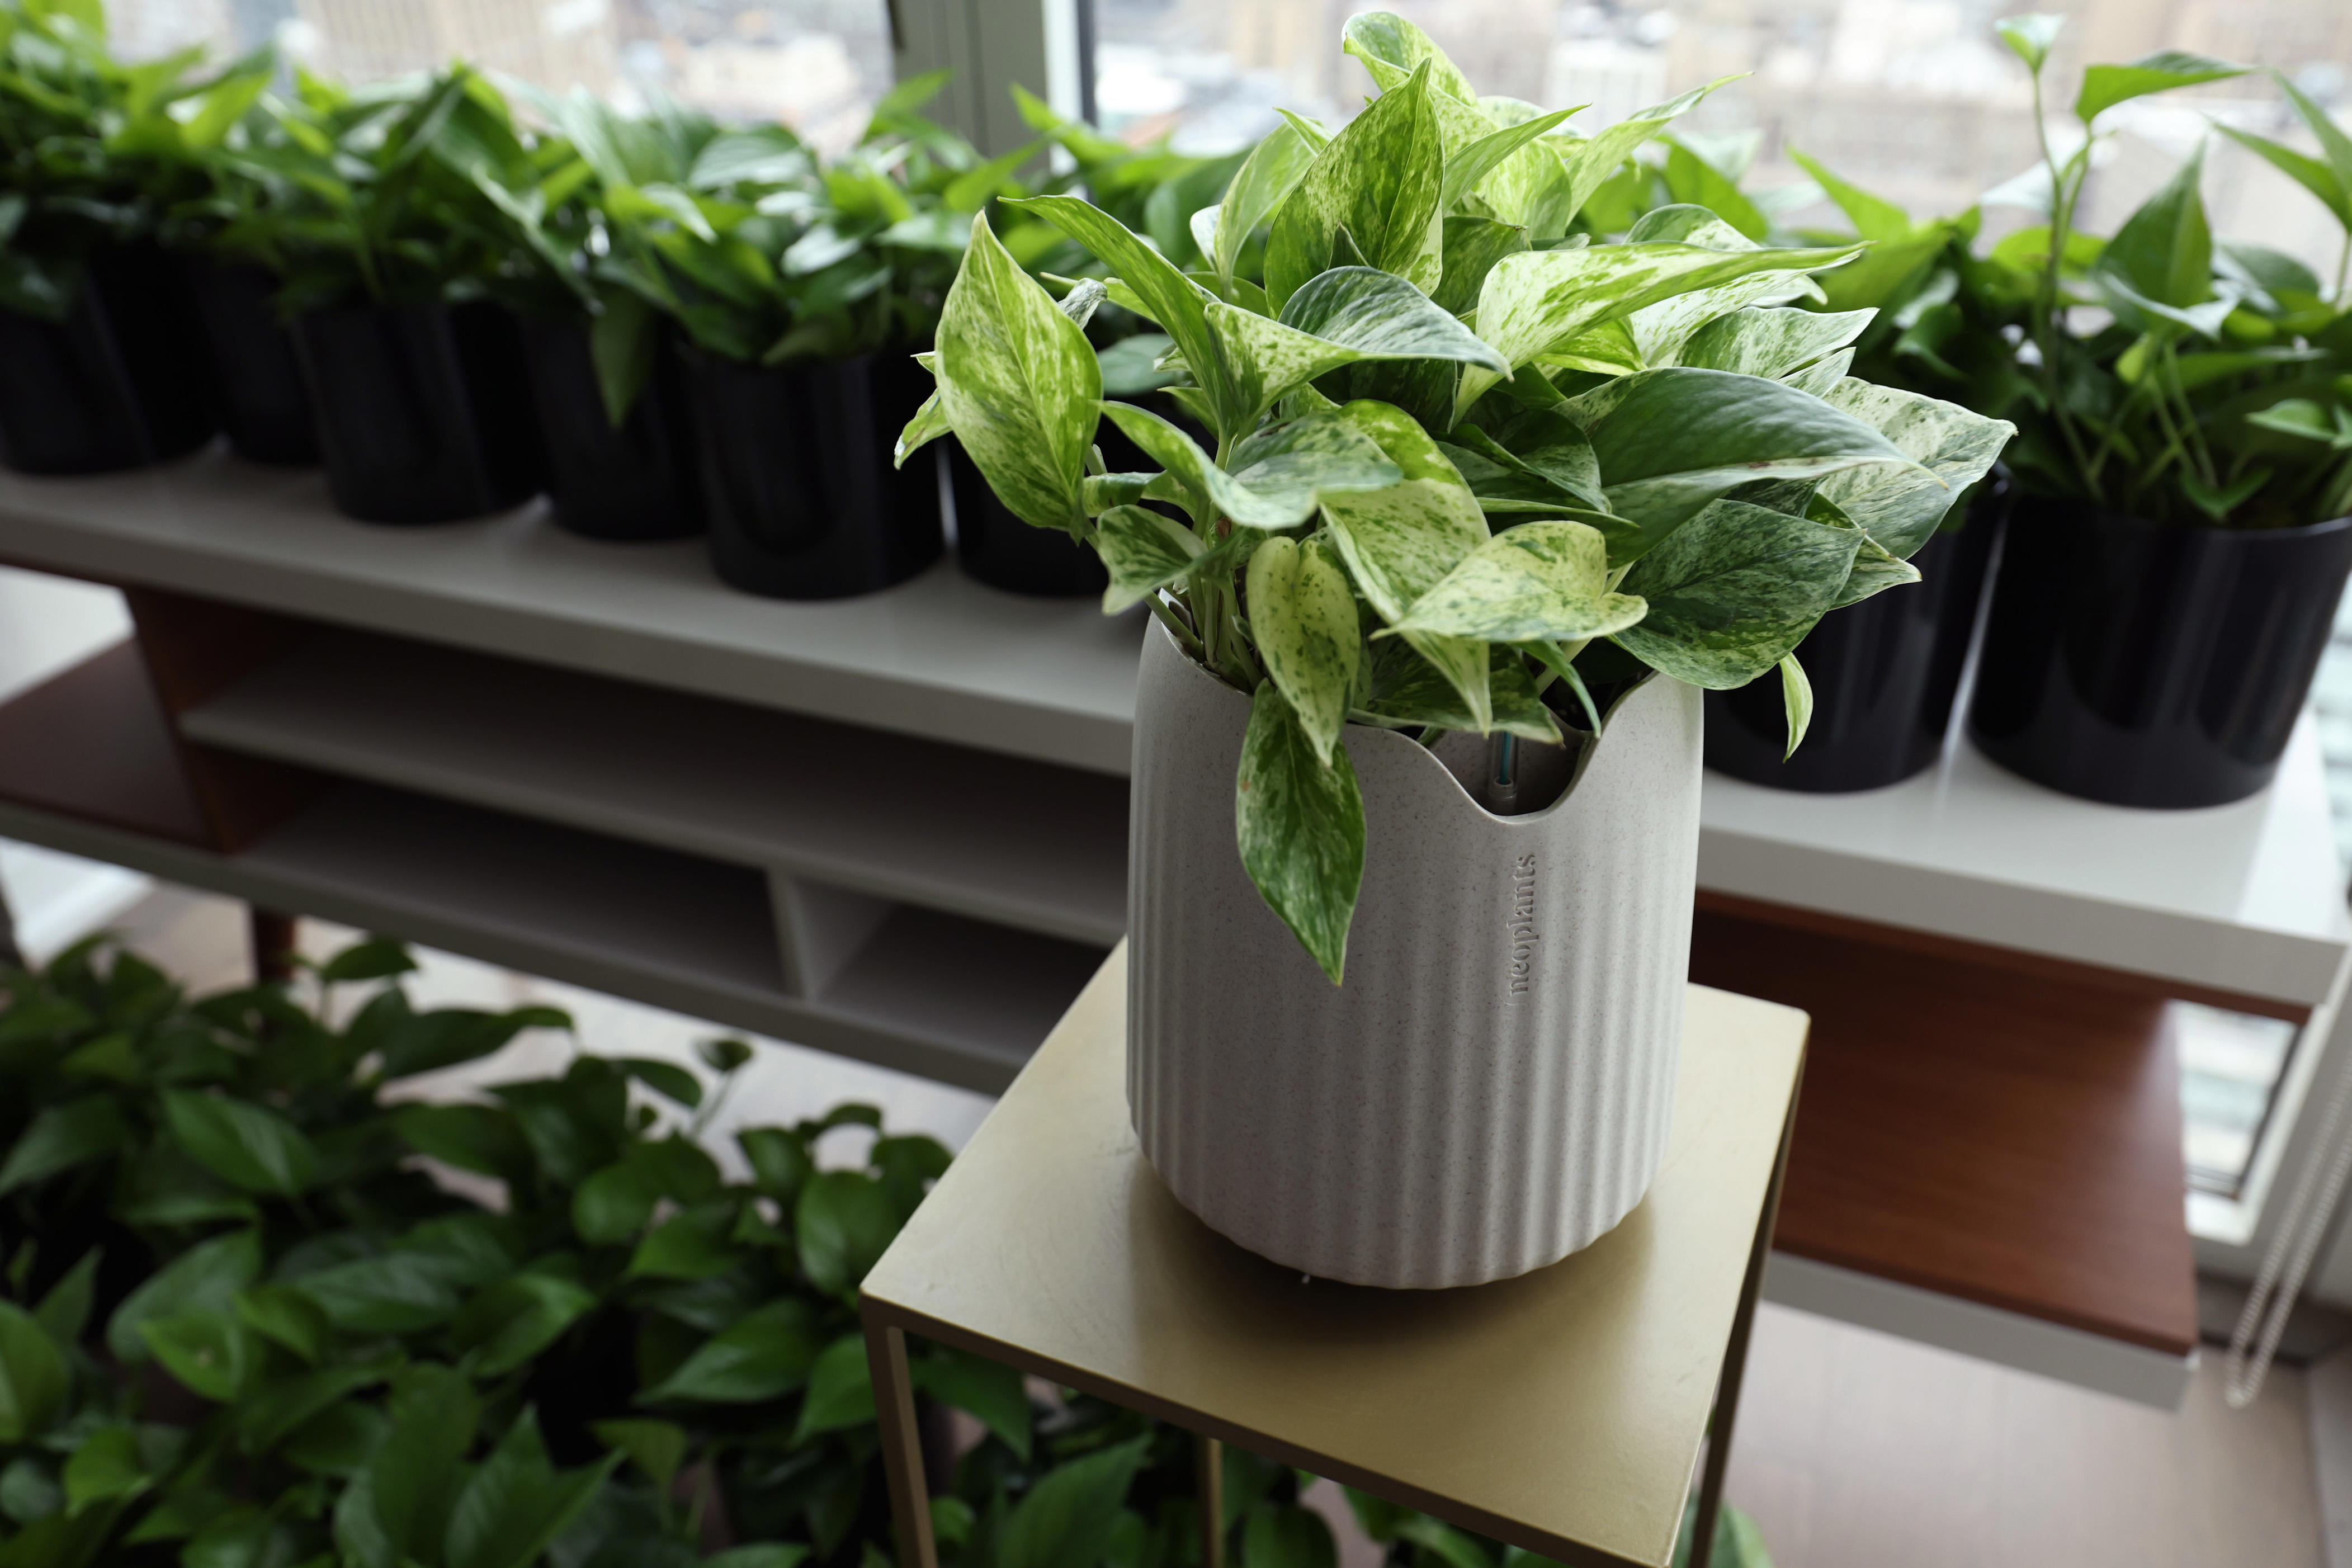 microsoft, this $119 houseplant is bioengineered to remove harmful air pollution in your home.